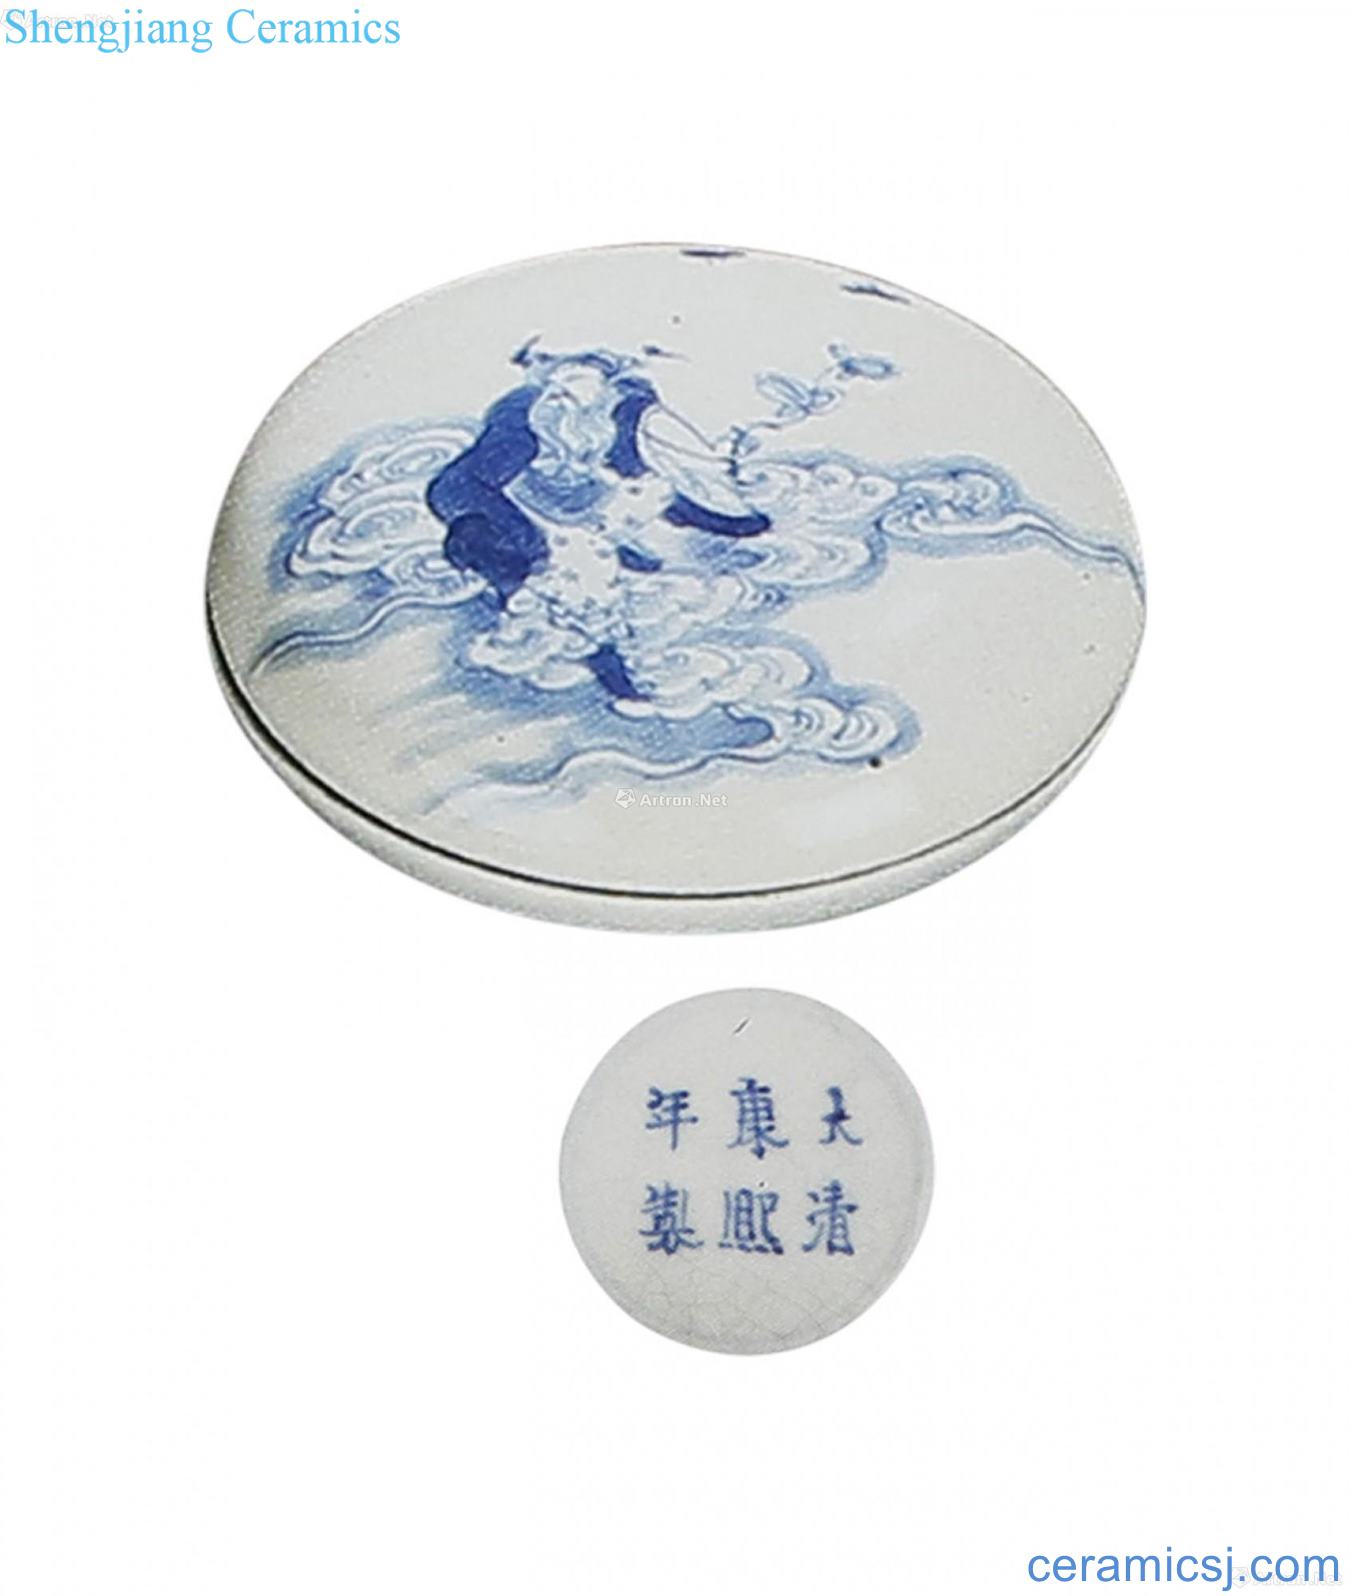 The qing emperor kangxi years Plasma blue and white wook tire seal box from continent